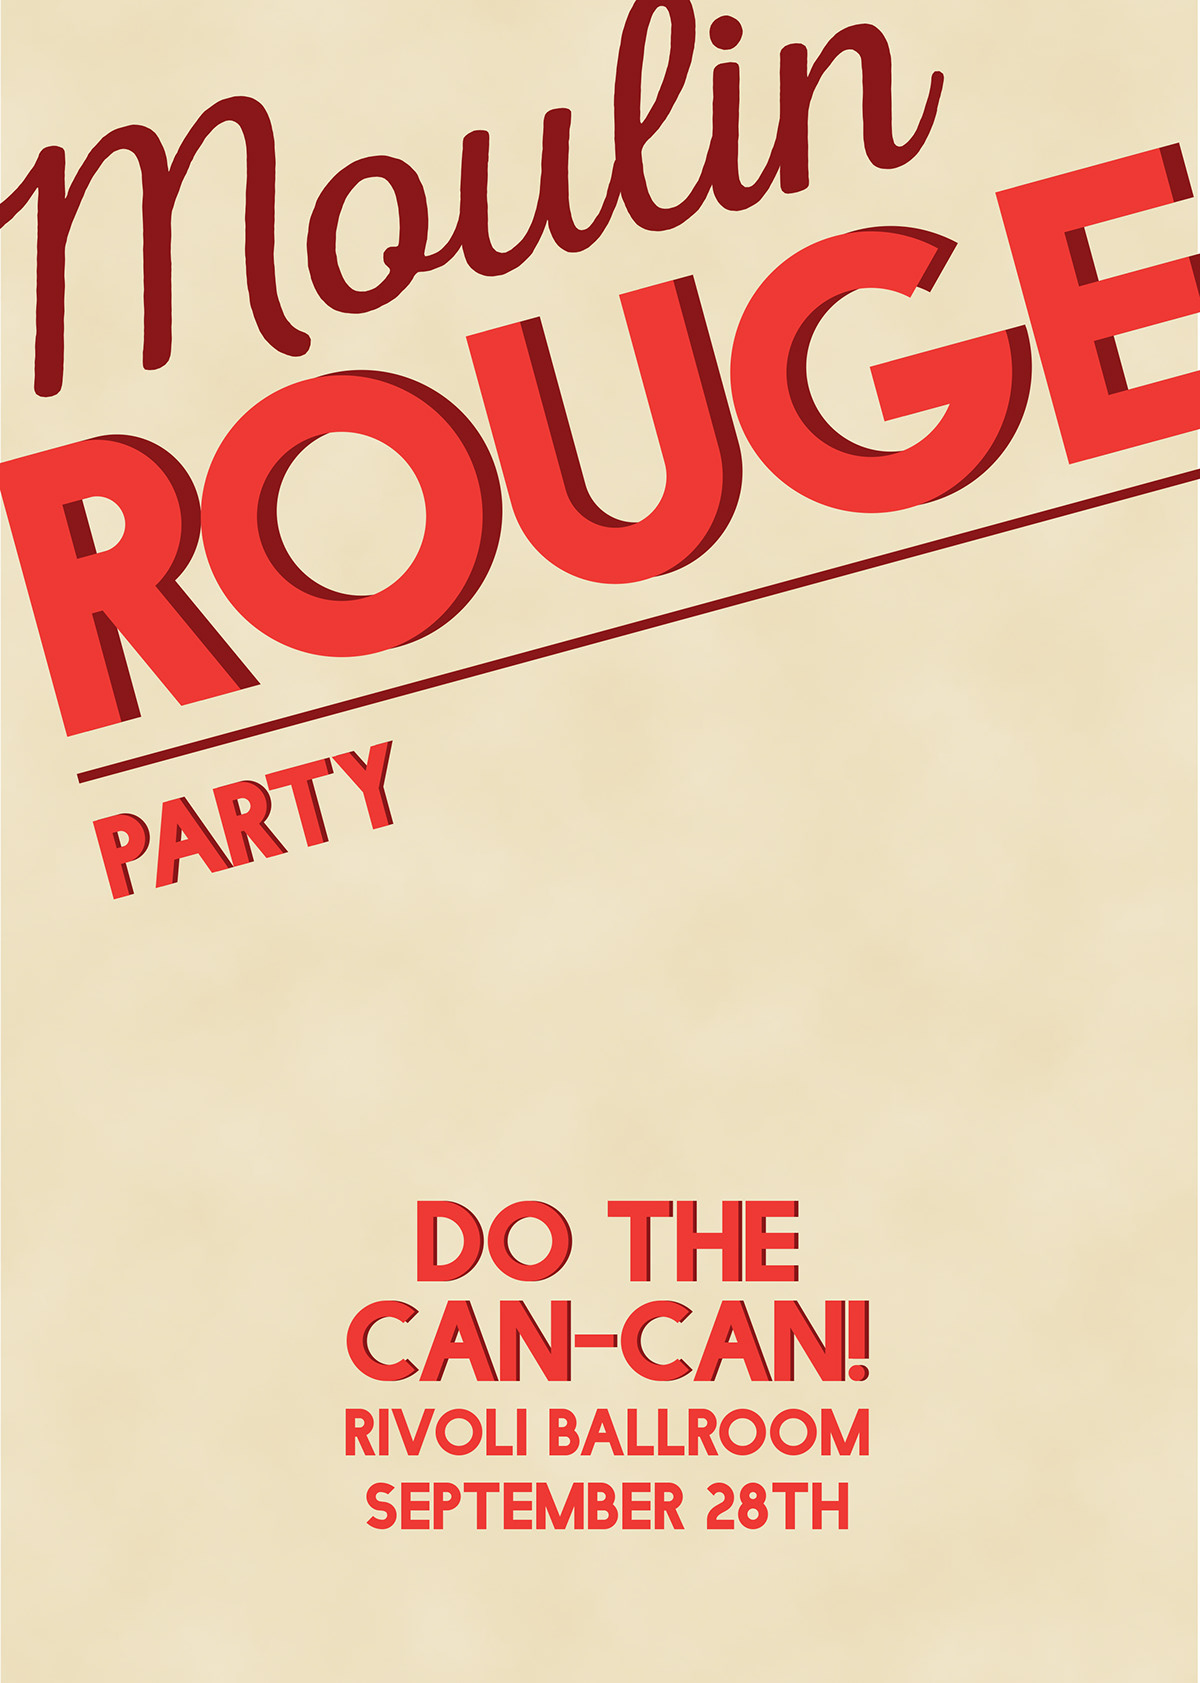 Moulin rouge party invite